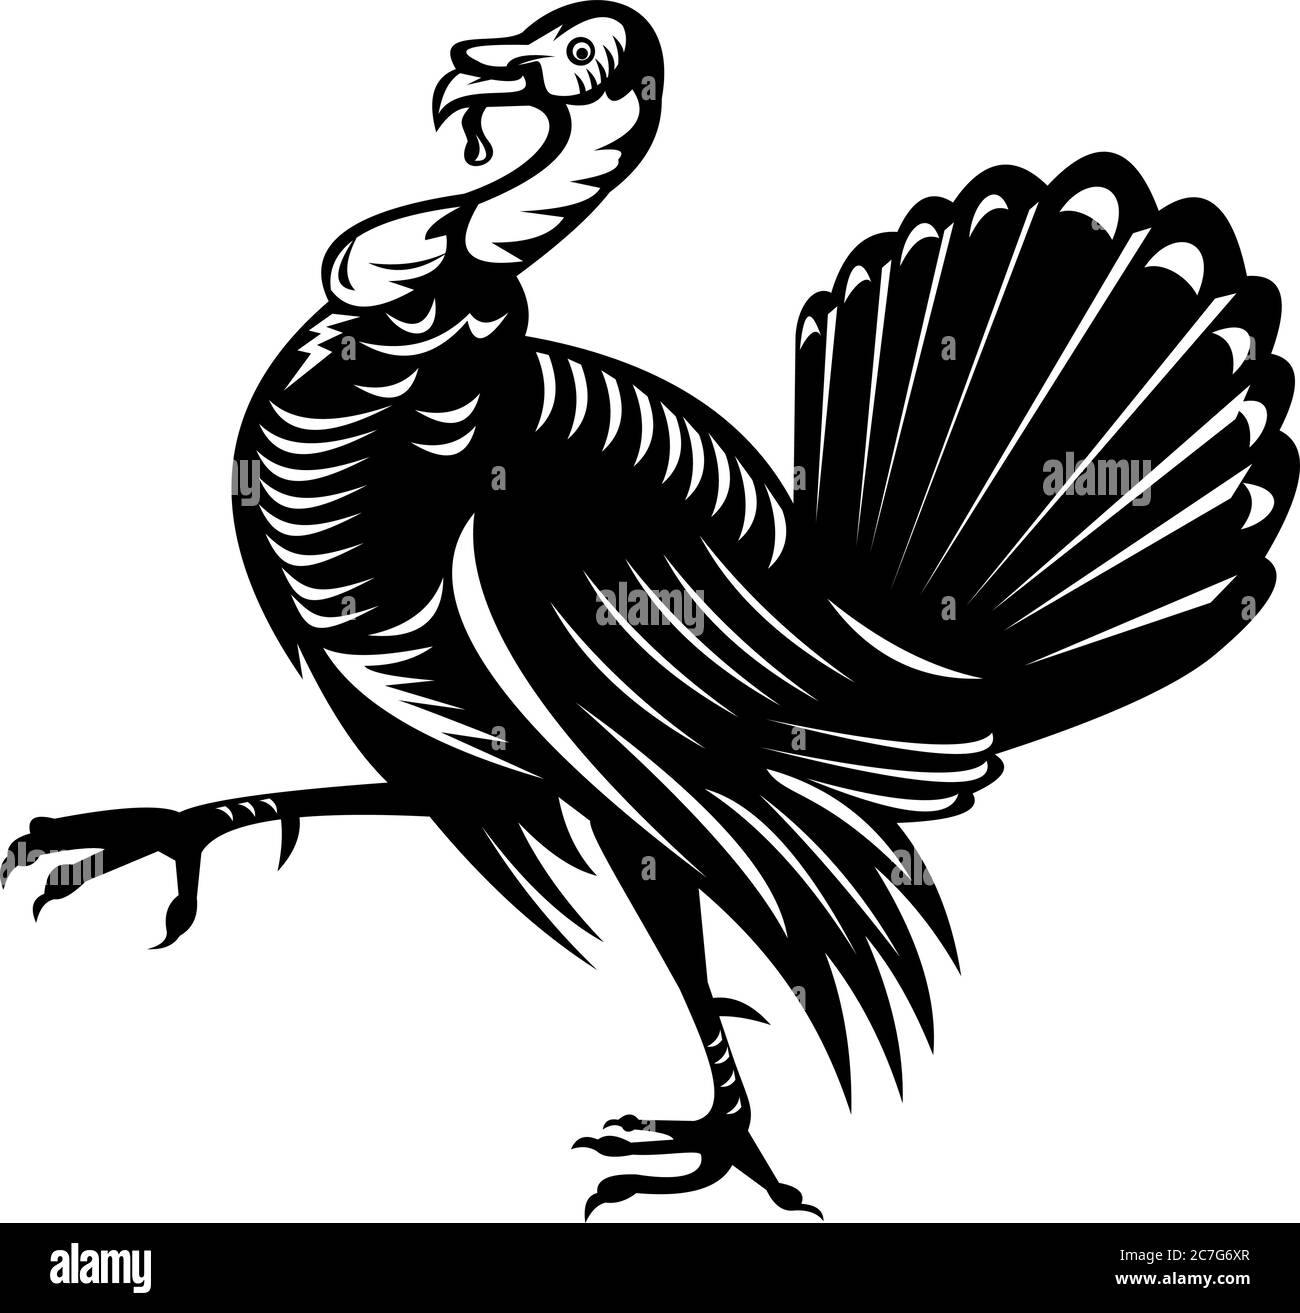 Retro black and white style illustration of a  wild turkey, a large bird in the genus Meleagris, which is native to the Americas, marching viewed from Stock Vector